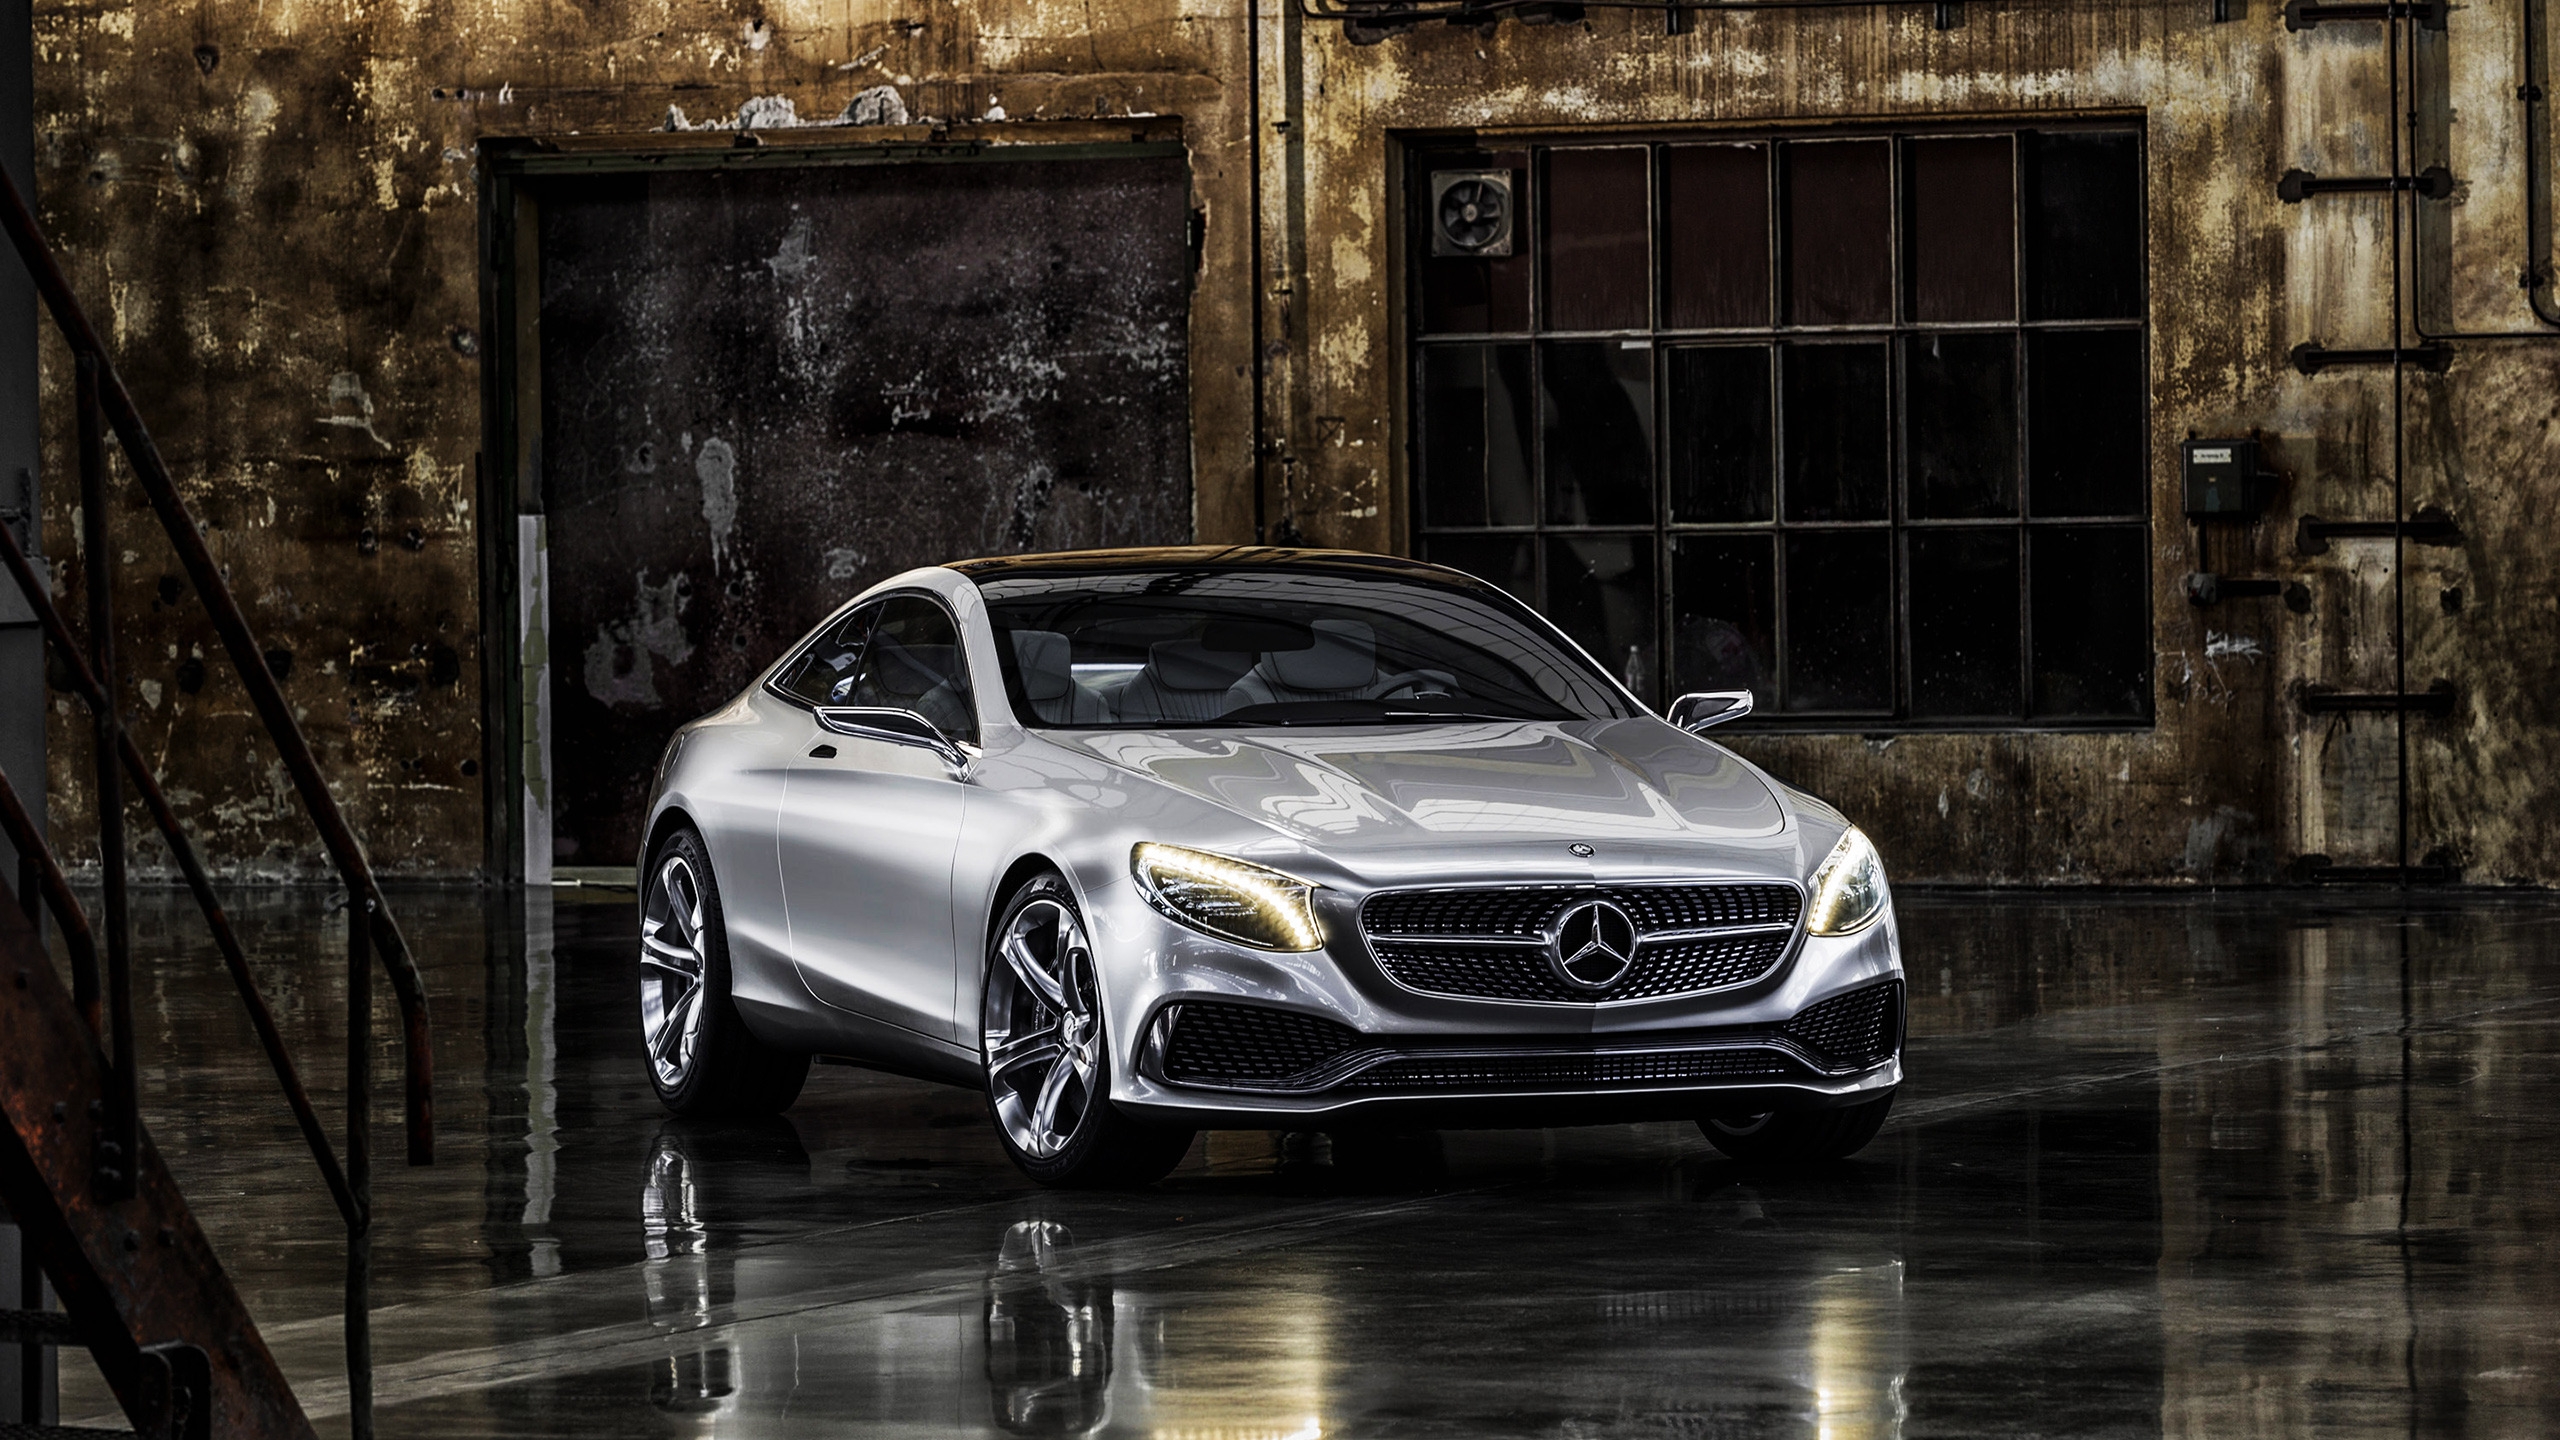 Mercedes S Concept for 2560x1440 HDTV resolution